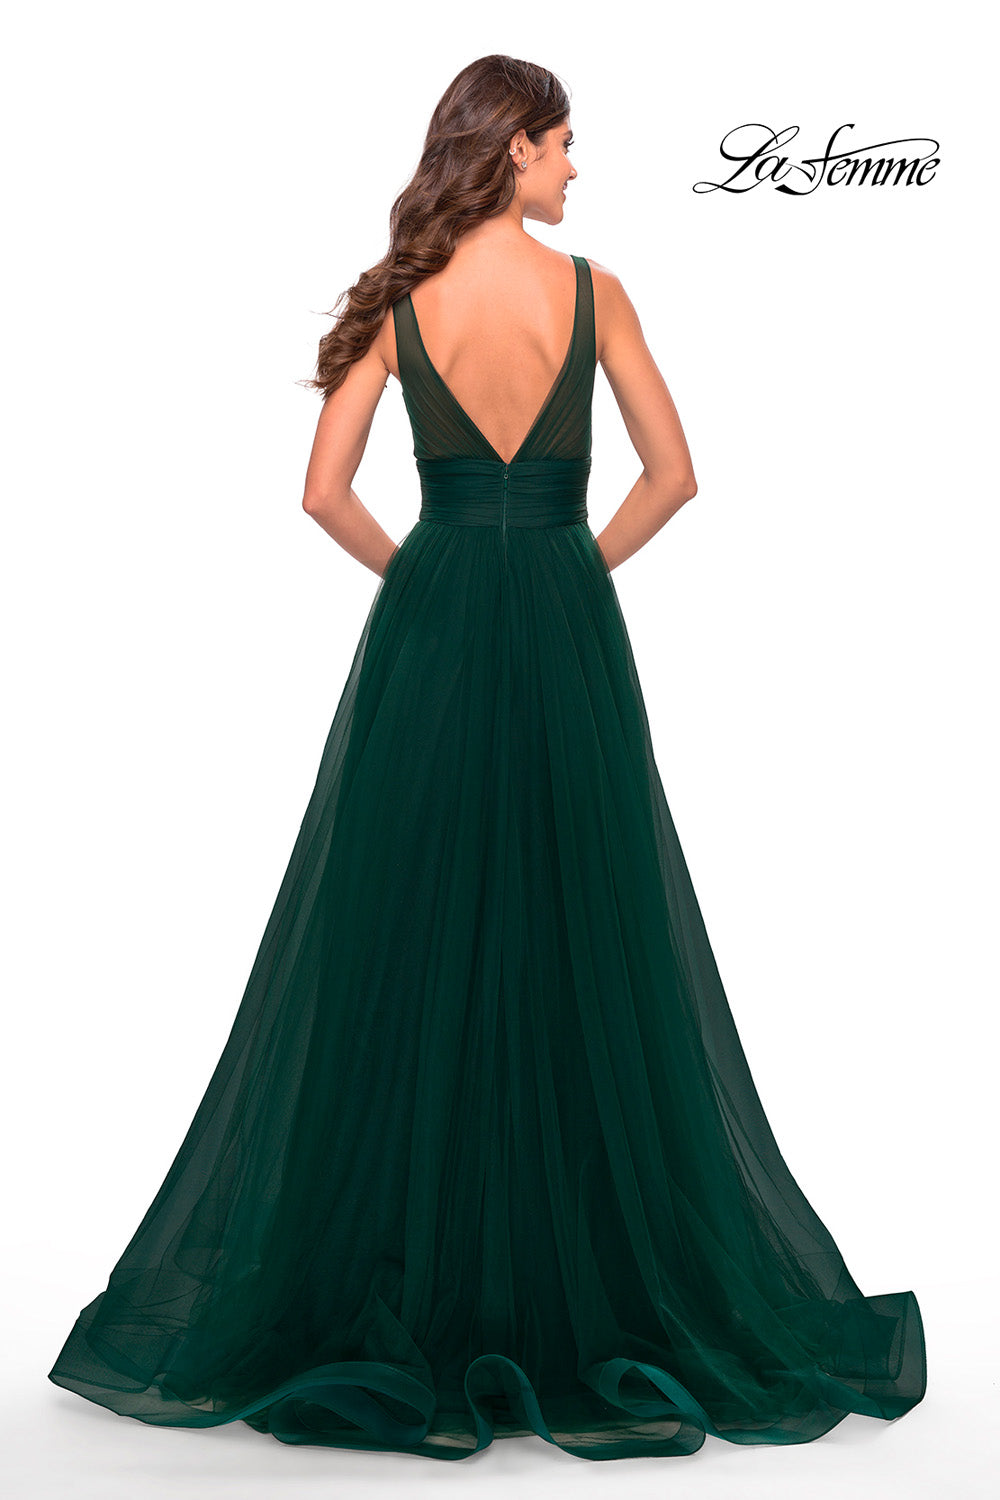 La Femme 31149 prom dress images.  La Femme 31149 is available in these colors: Emerald, Red, Royal Blue.